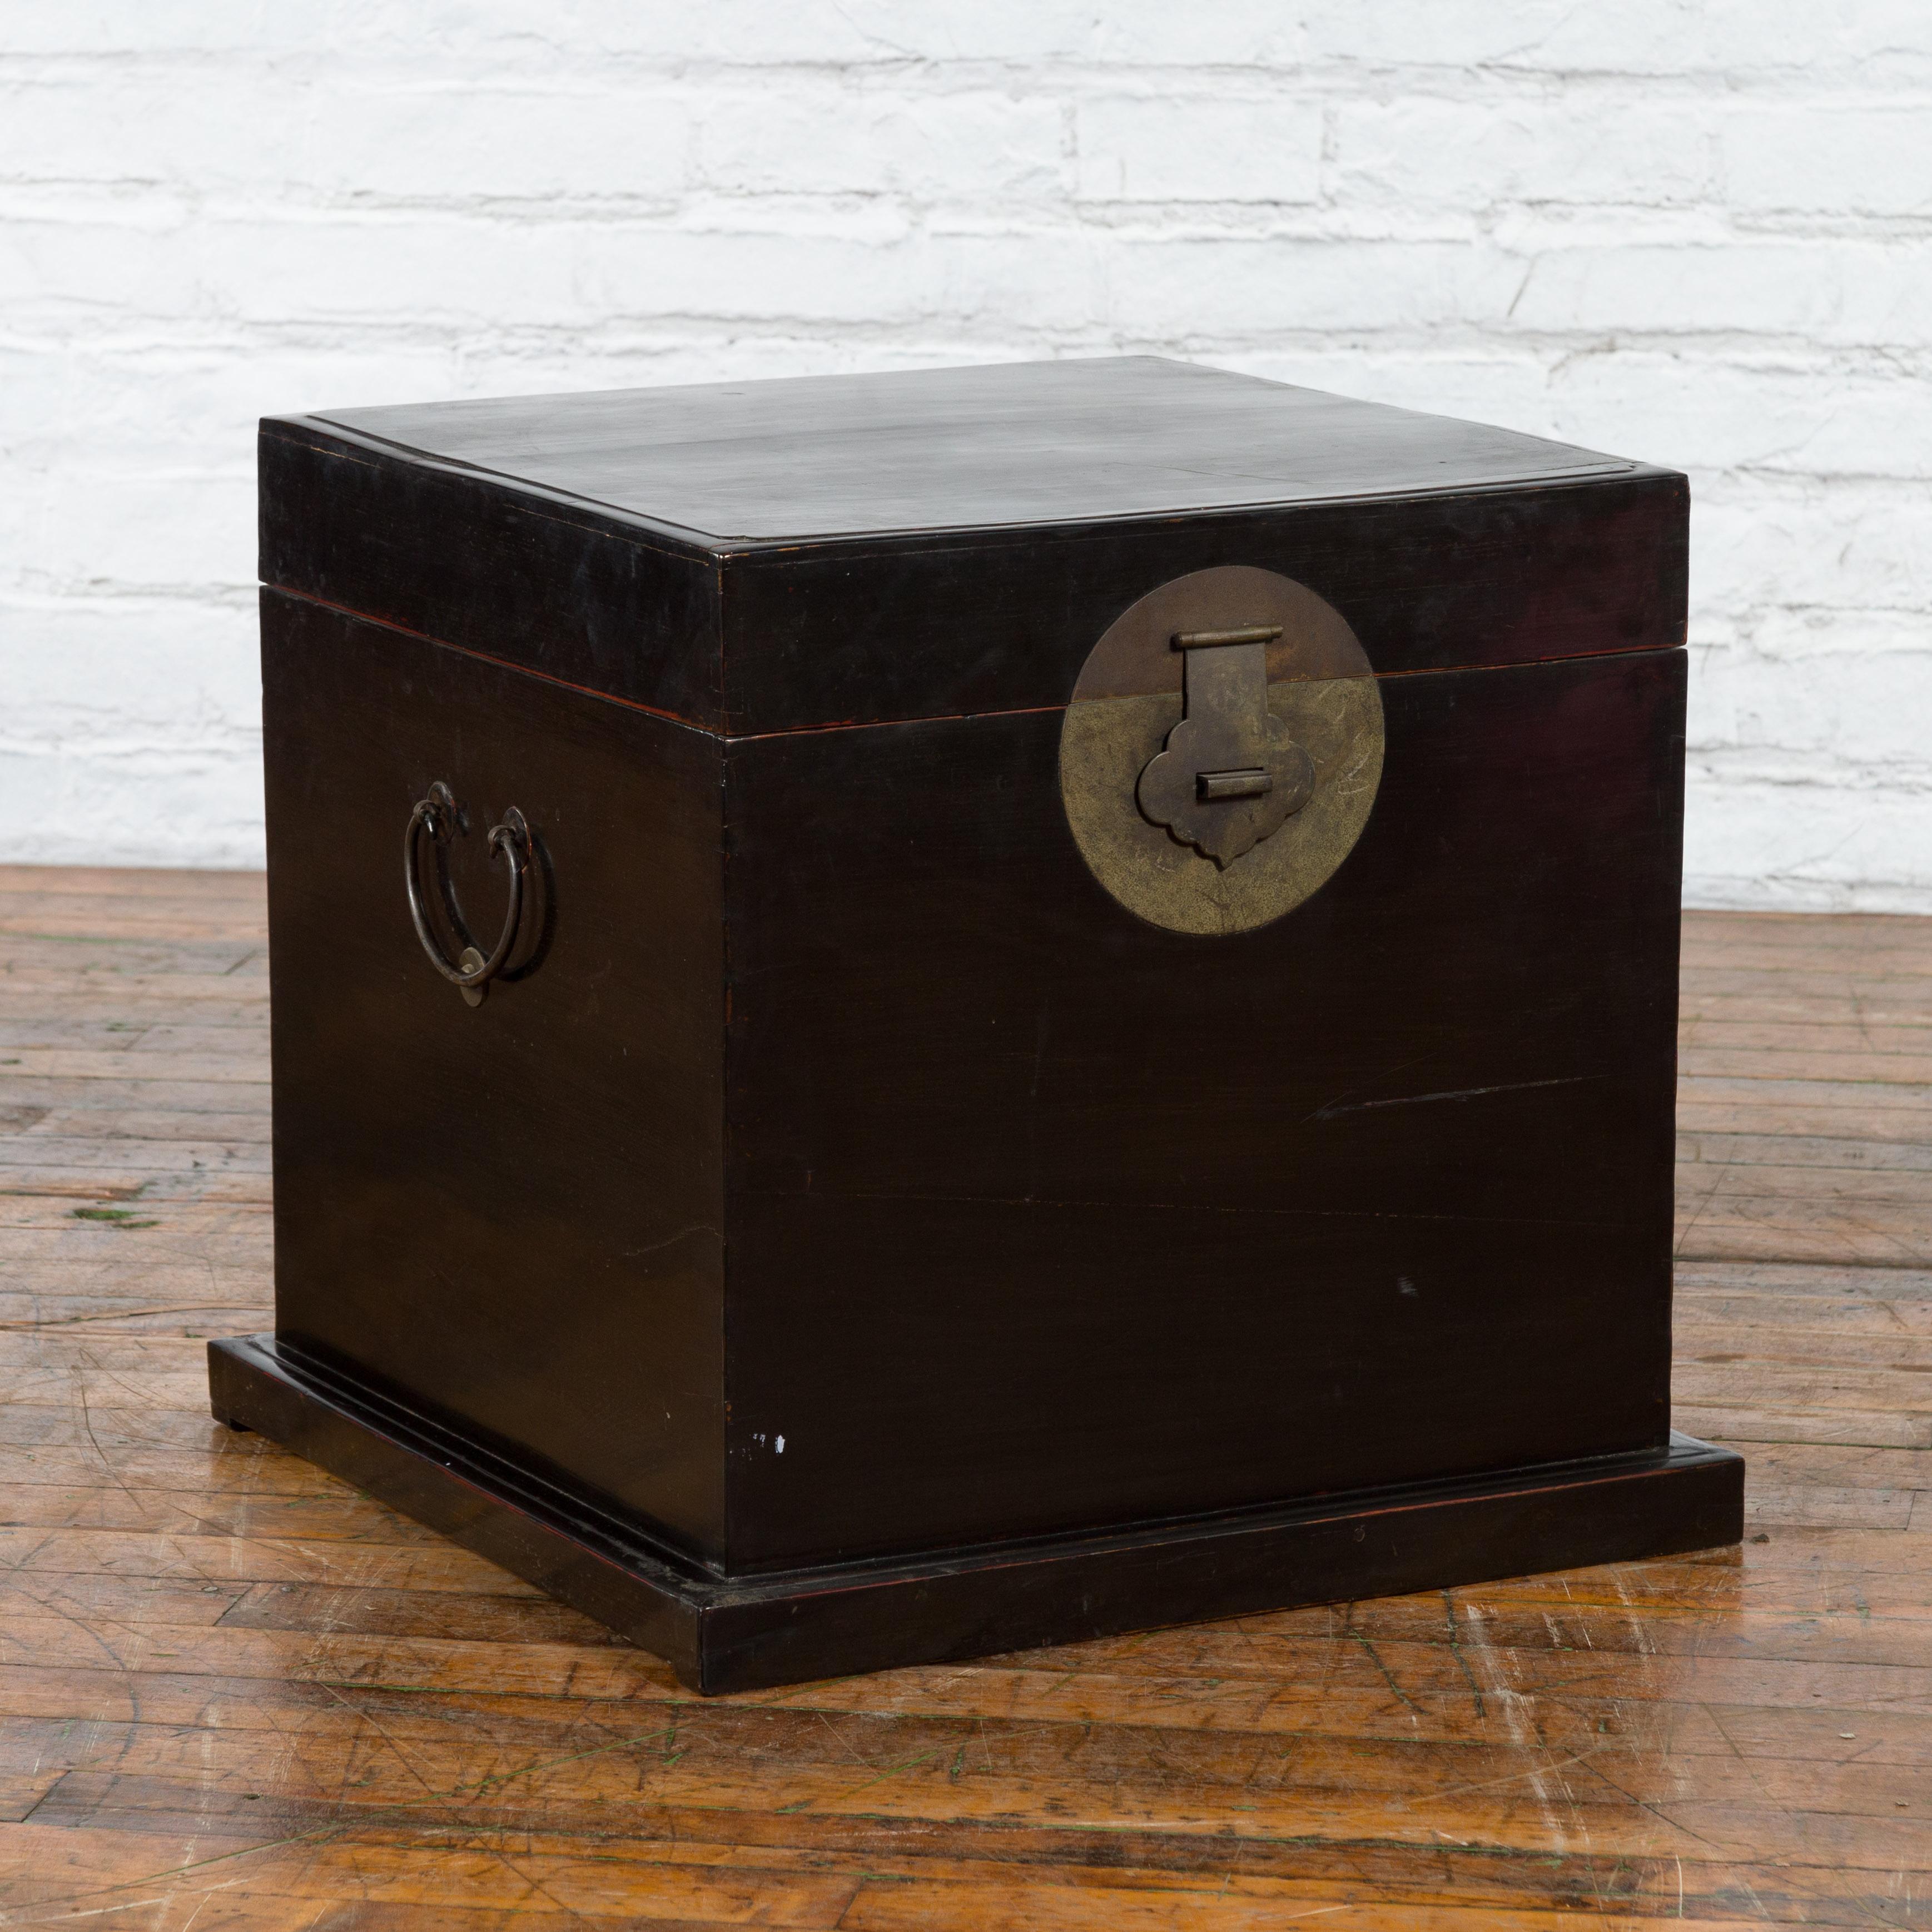 A Chinese black lacquer trunk from the early 20th century with large brass medallion and lateral C-scroll handles. Created in China during the early years of the 20th century, this trunk features a black lacquer perfectly complimenting its